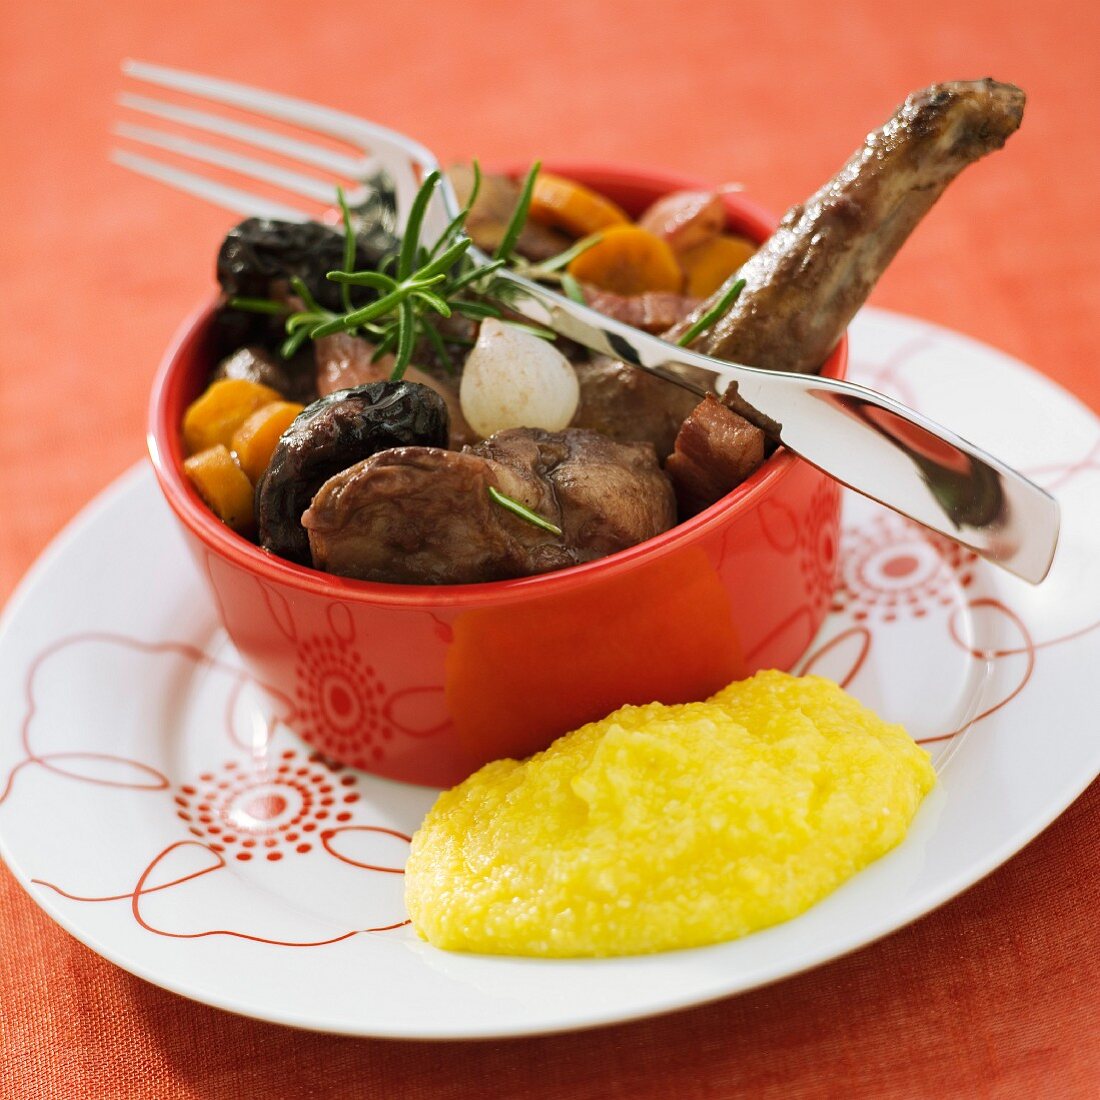 Rabbit stew with baked plums